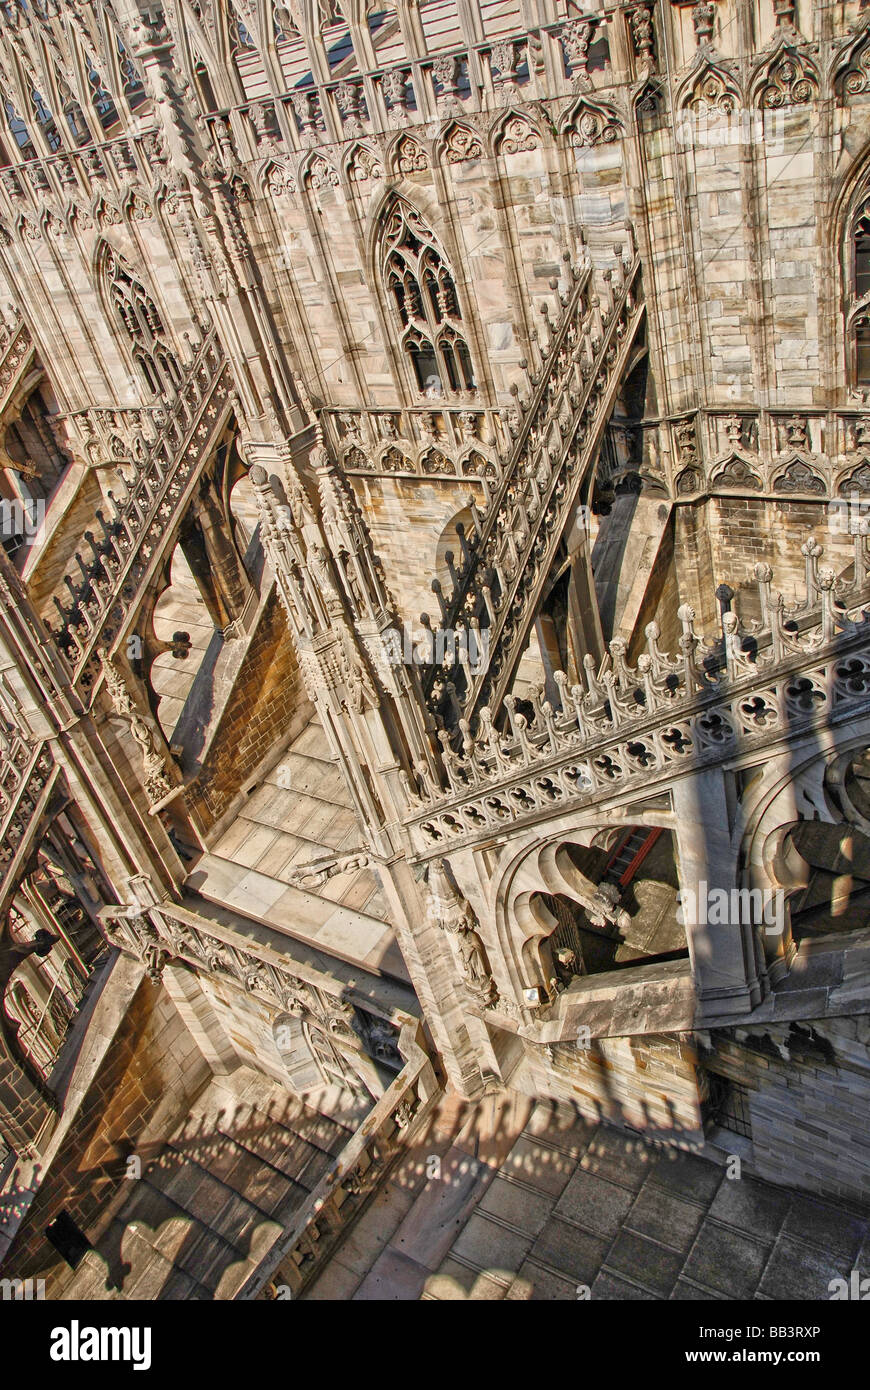 Milan cathedral Italy, in the style of an Escher image. Stock Photo